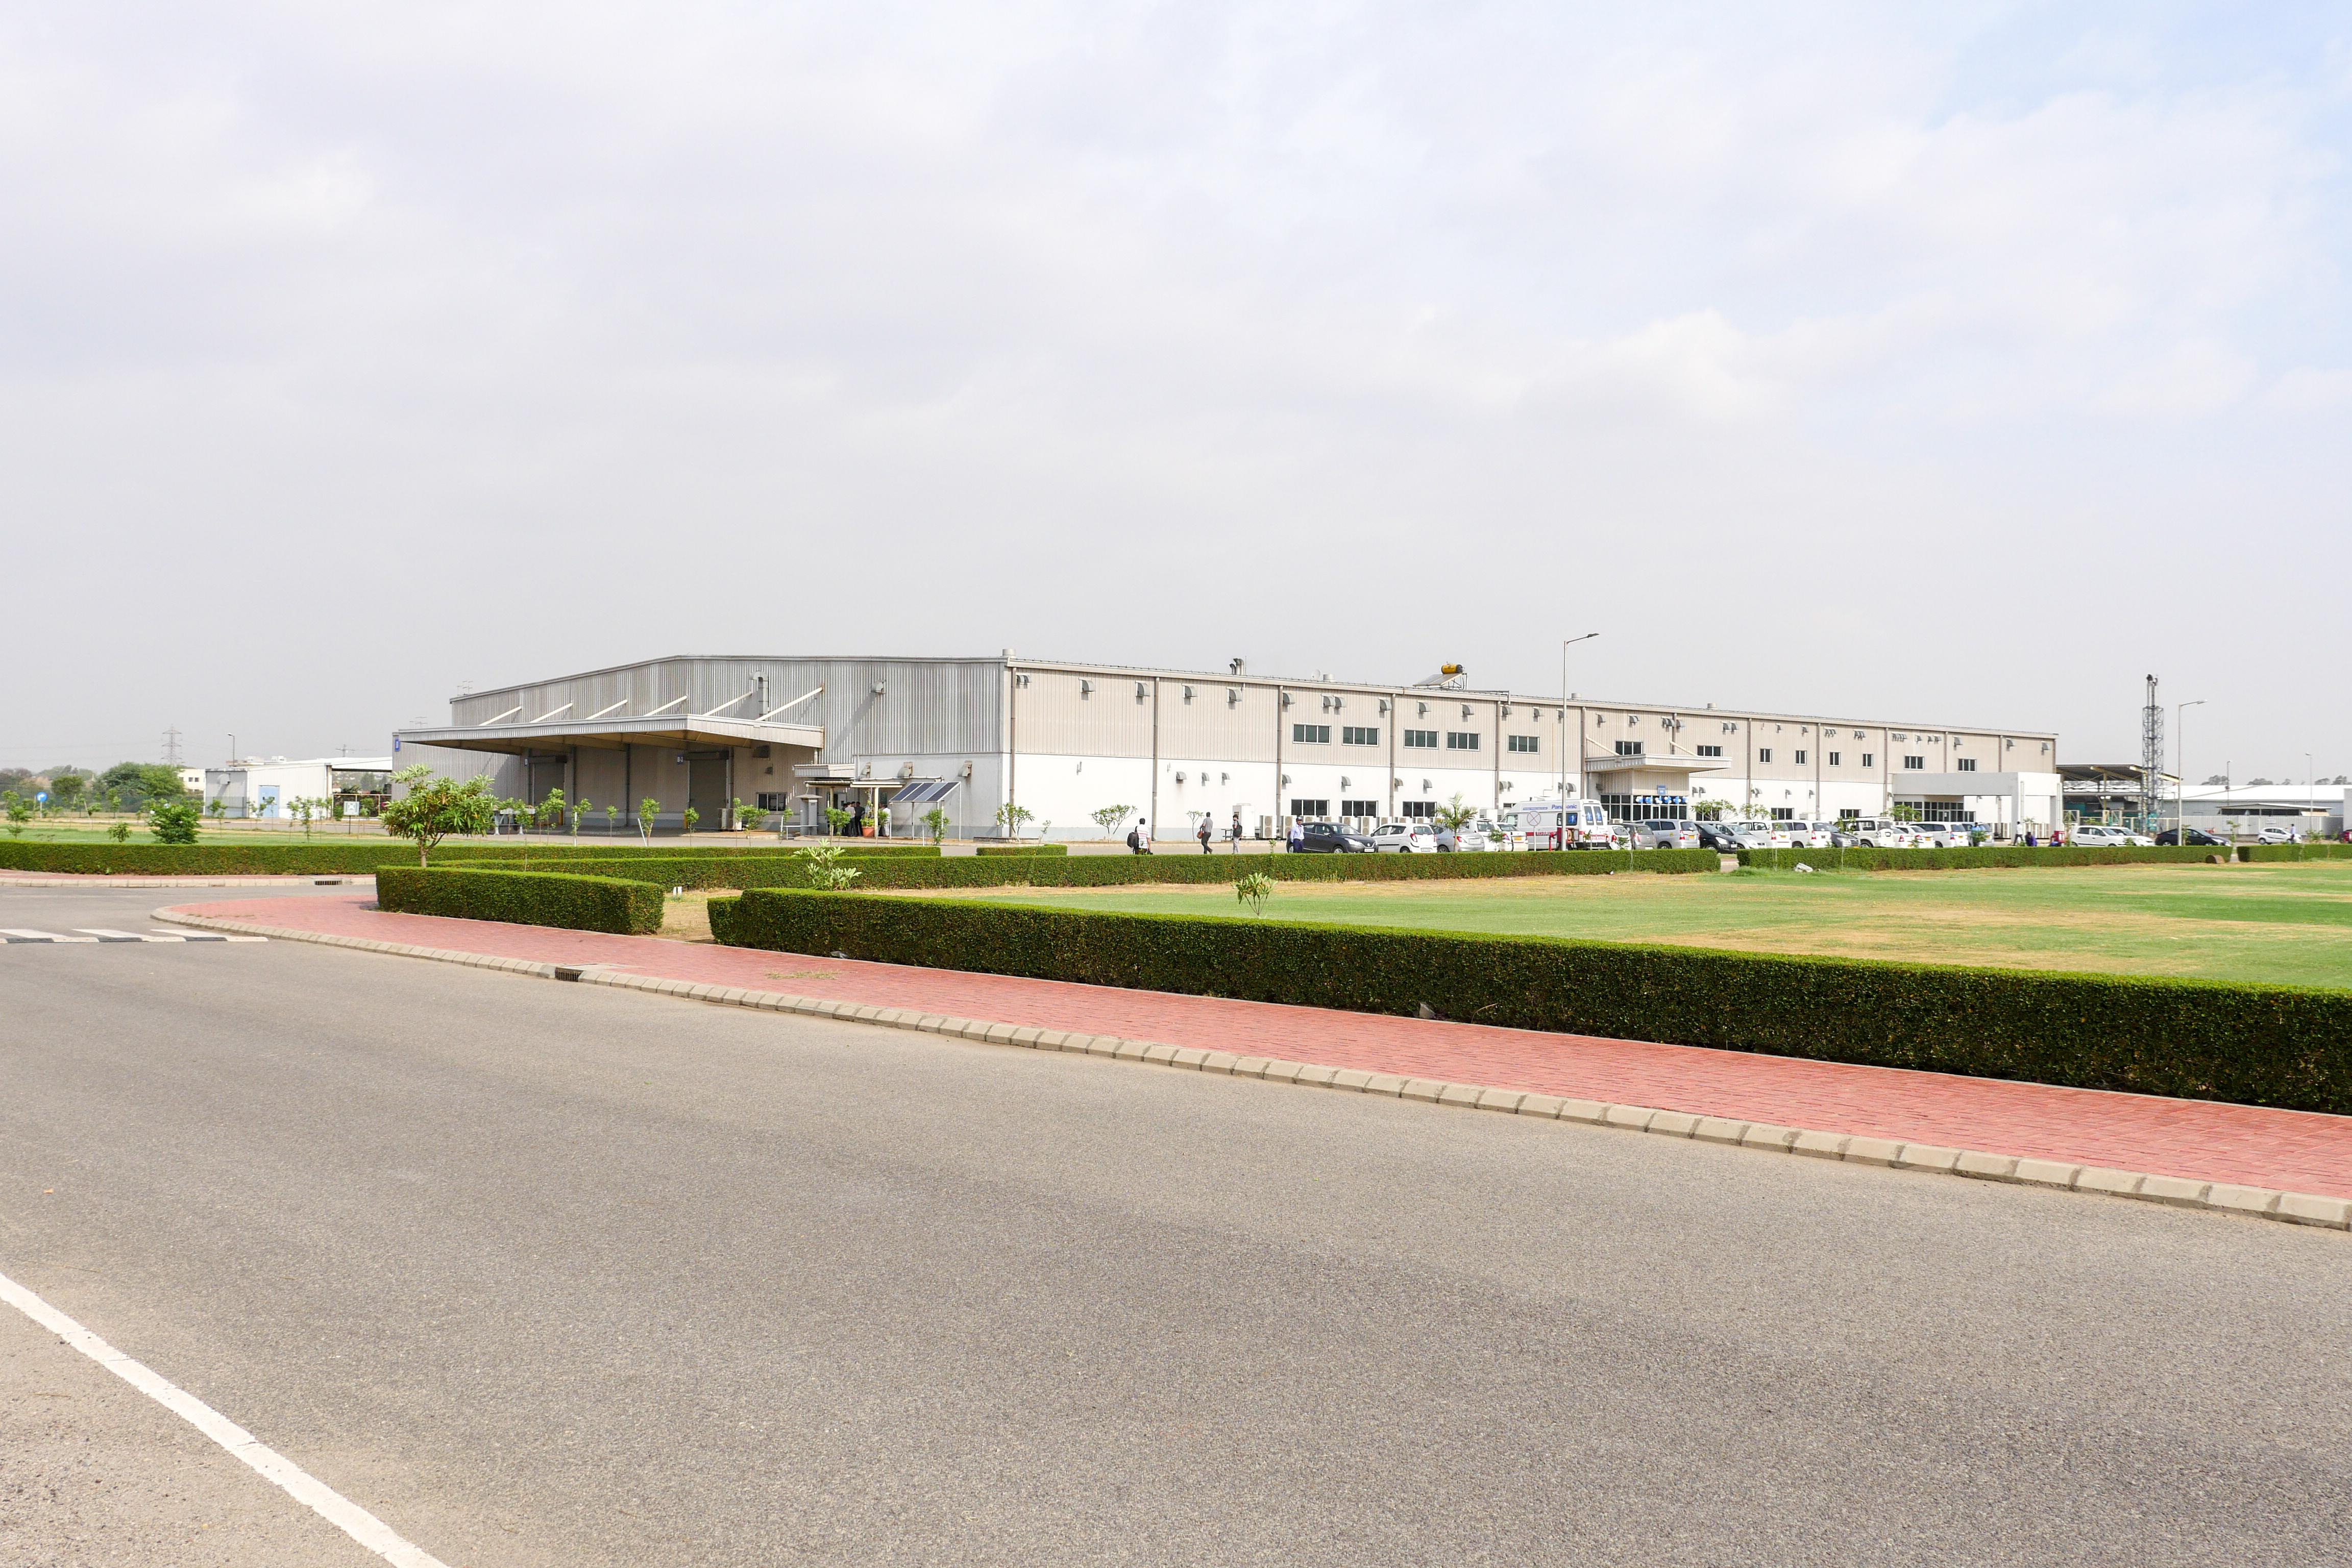 photo: A Panasonic plant in Haryana, India, where the launching ceremony took place